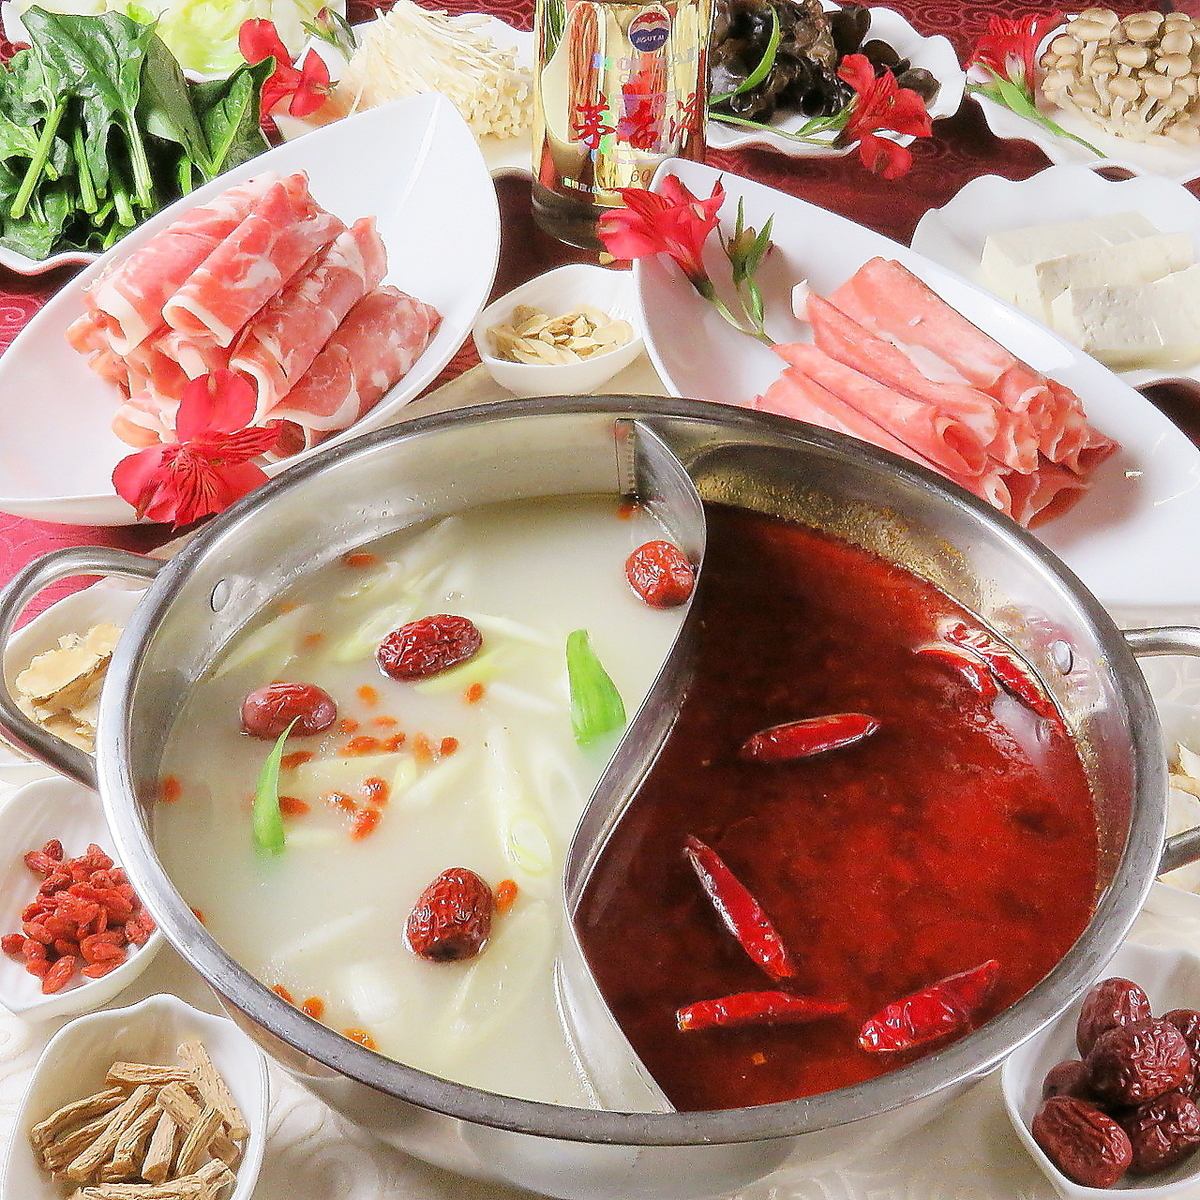 All-you-can-eat authentic medicinal hot pot course for 5,500 yen.